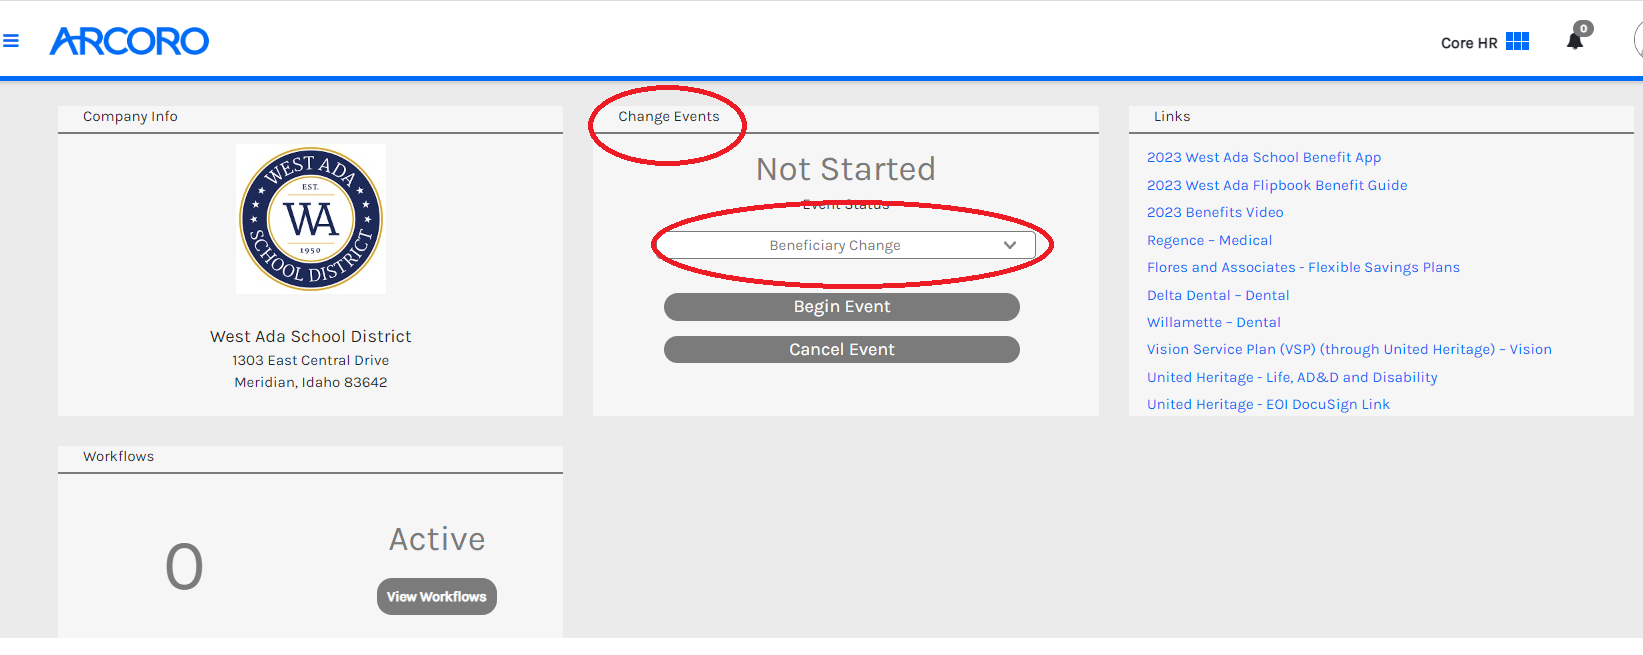 Screen grab of the ARCORO employee portal. Red circles around the "Change Events" and "Beneficiary Change"